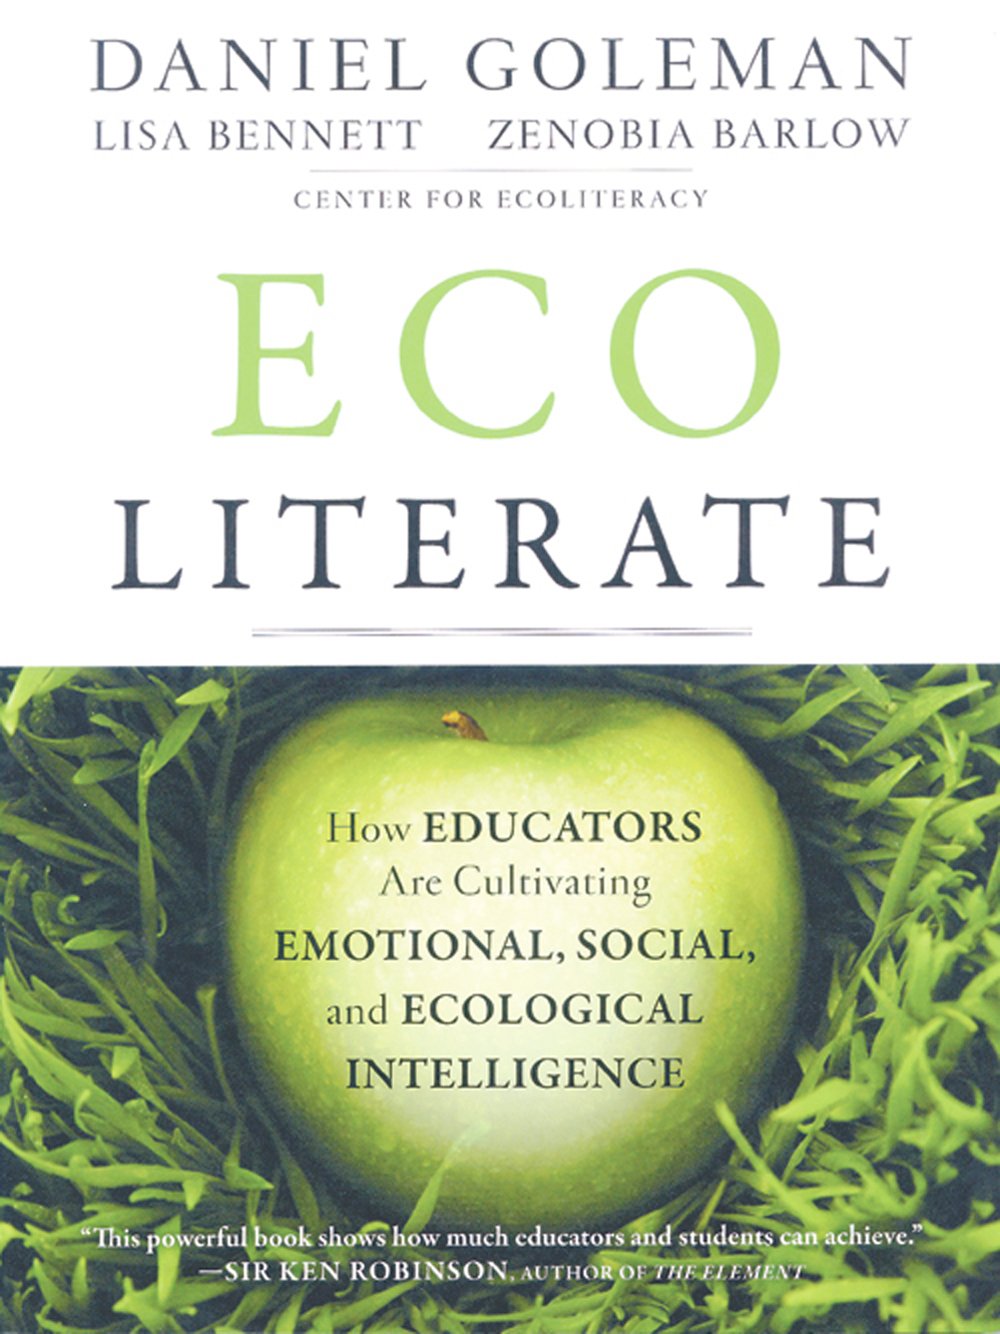 Ecoliterate: How Educators are Cultivating Emotional, Social, and Ecological Intelligence